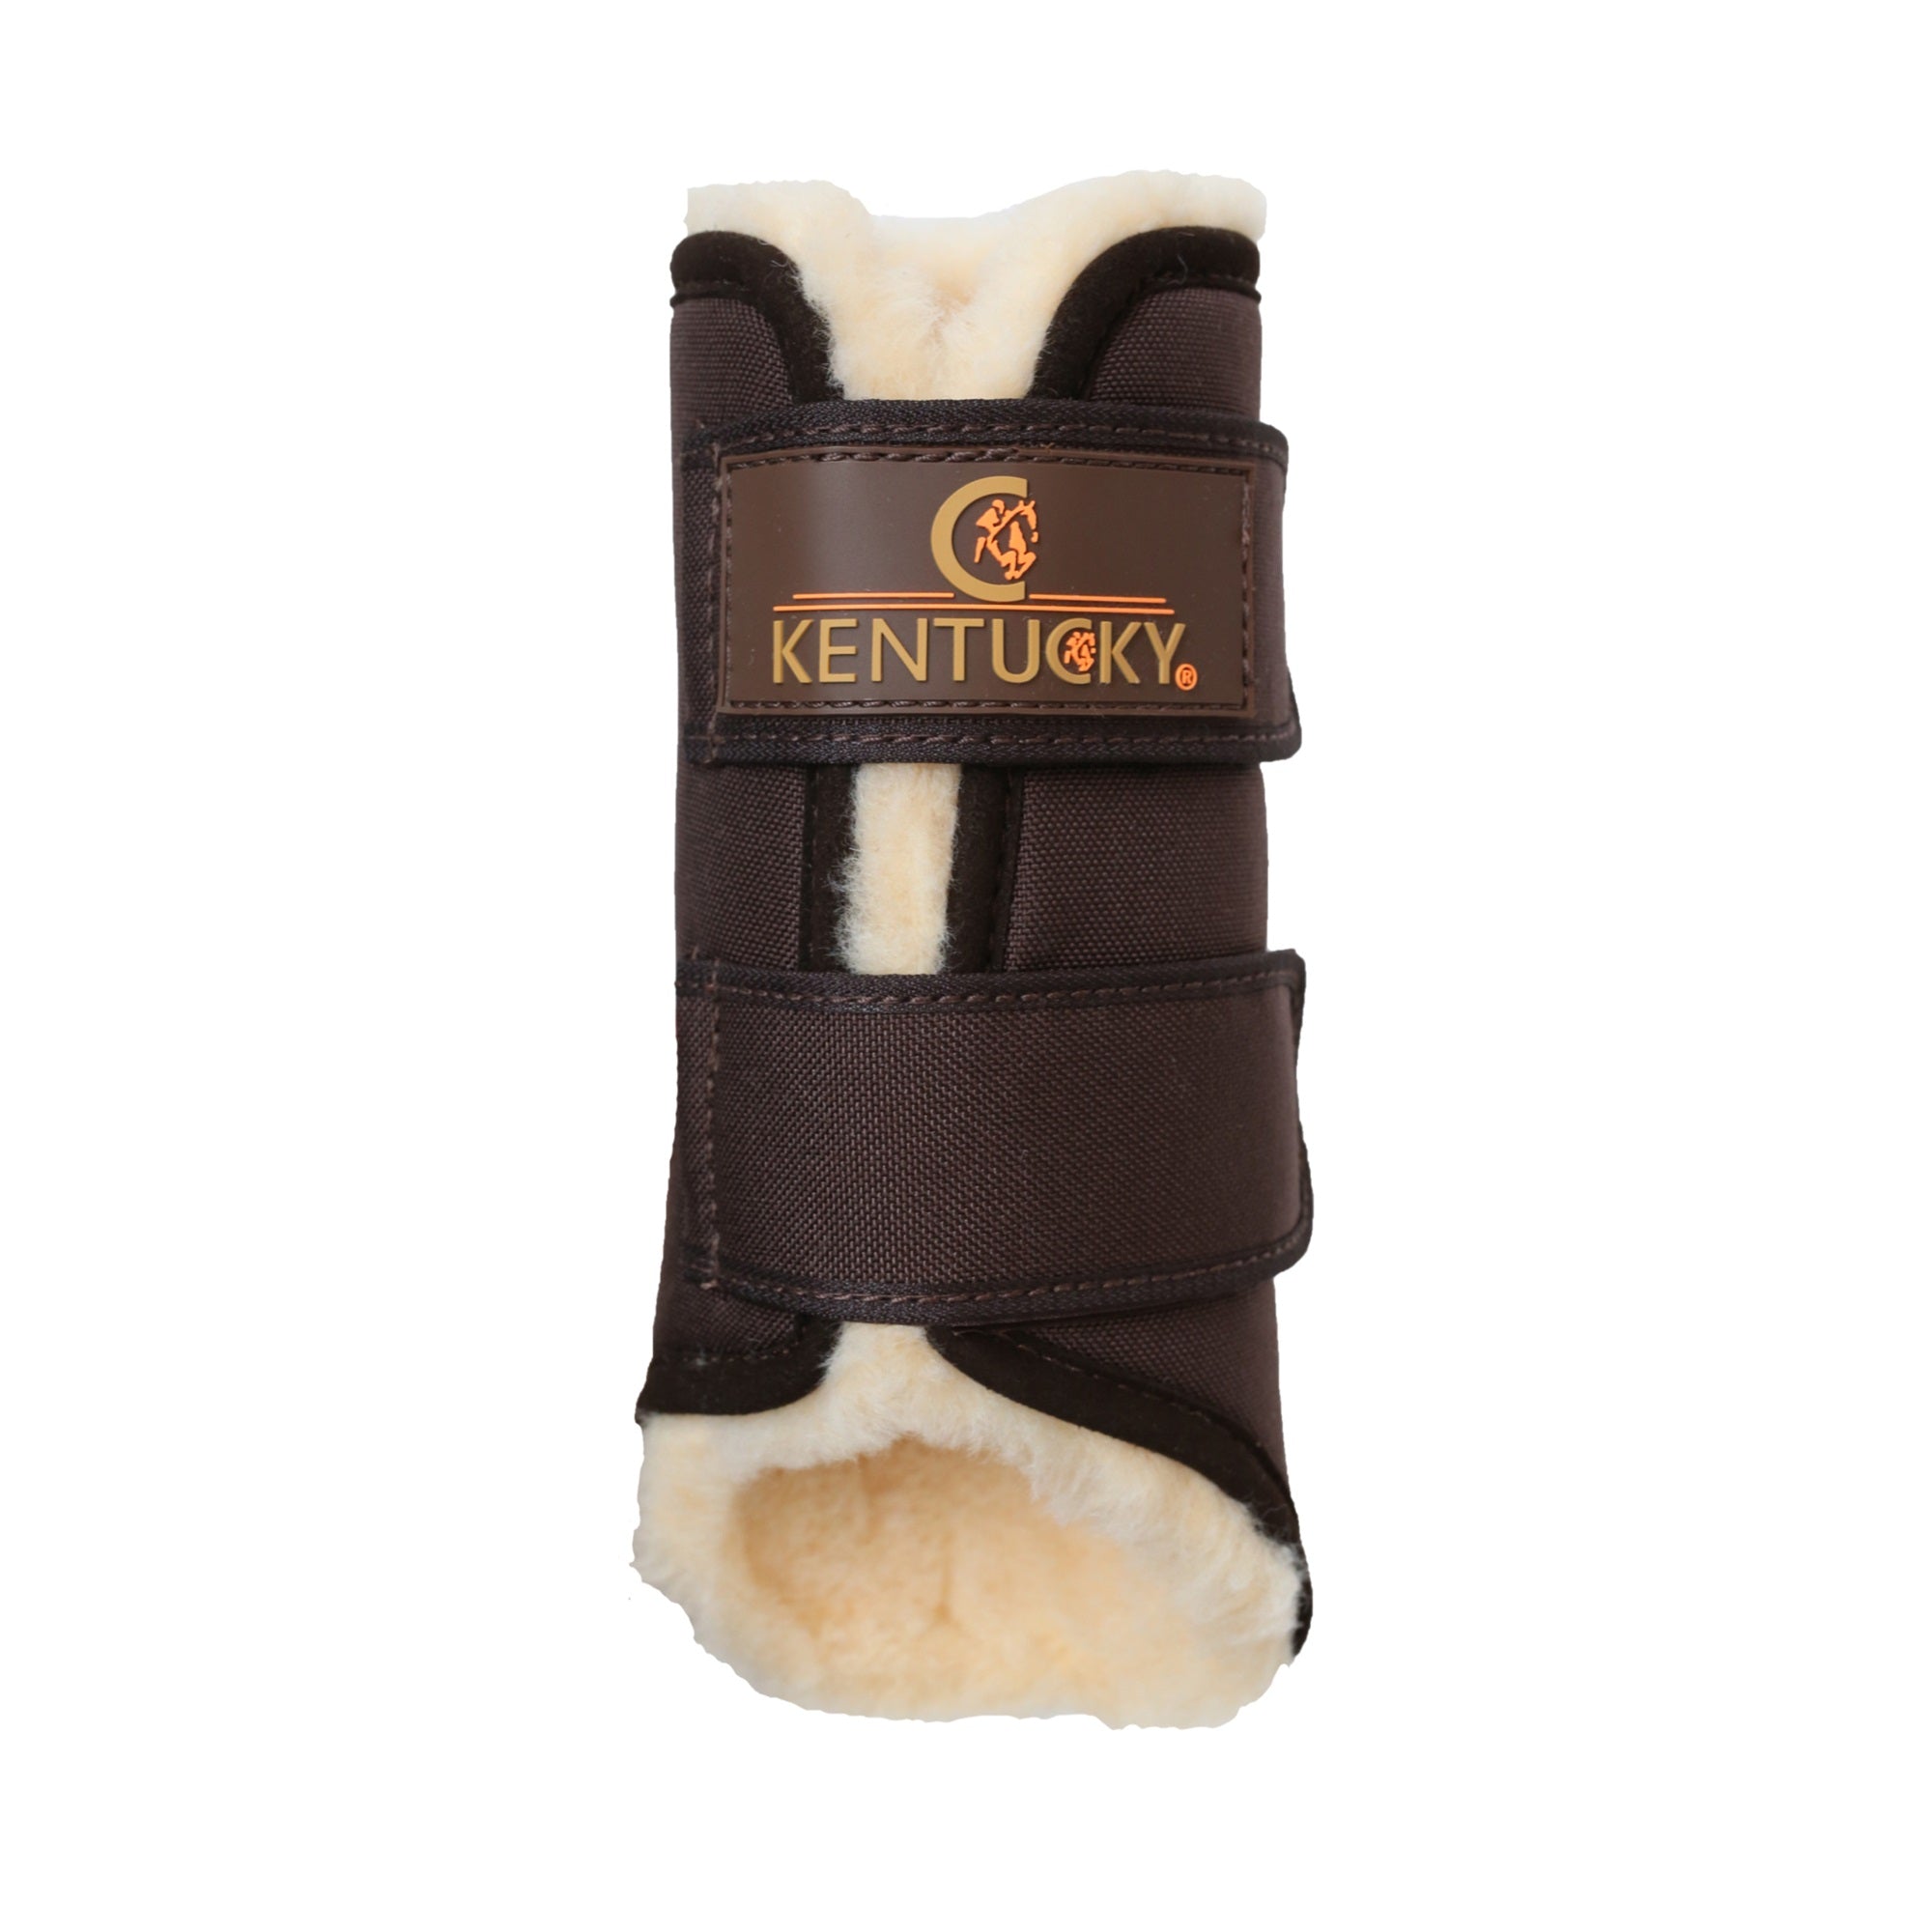 Kentucky Horsewear Turnout Boots Solimbra Hind, Brown